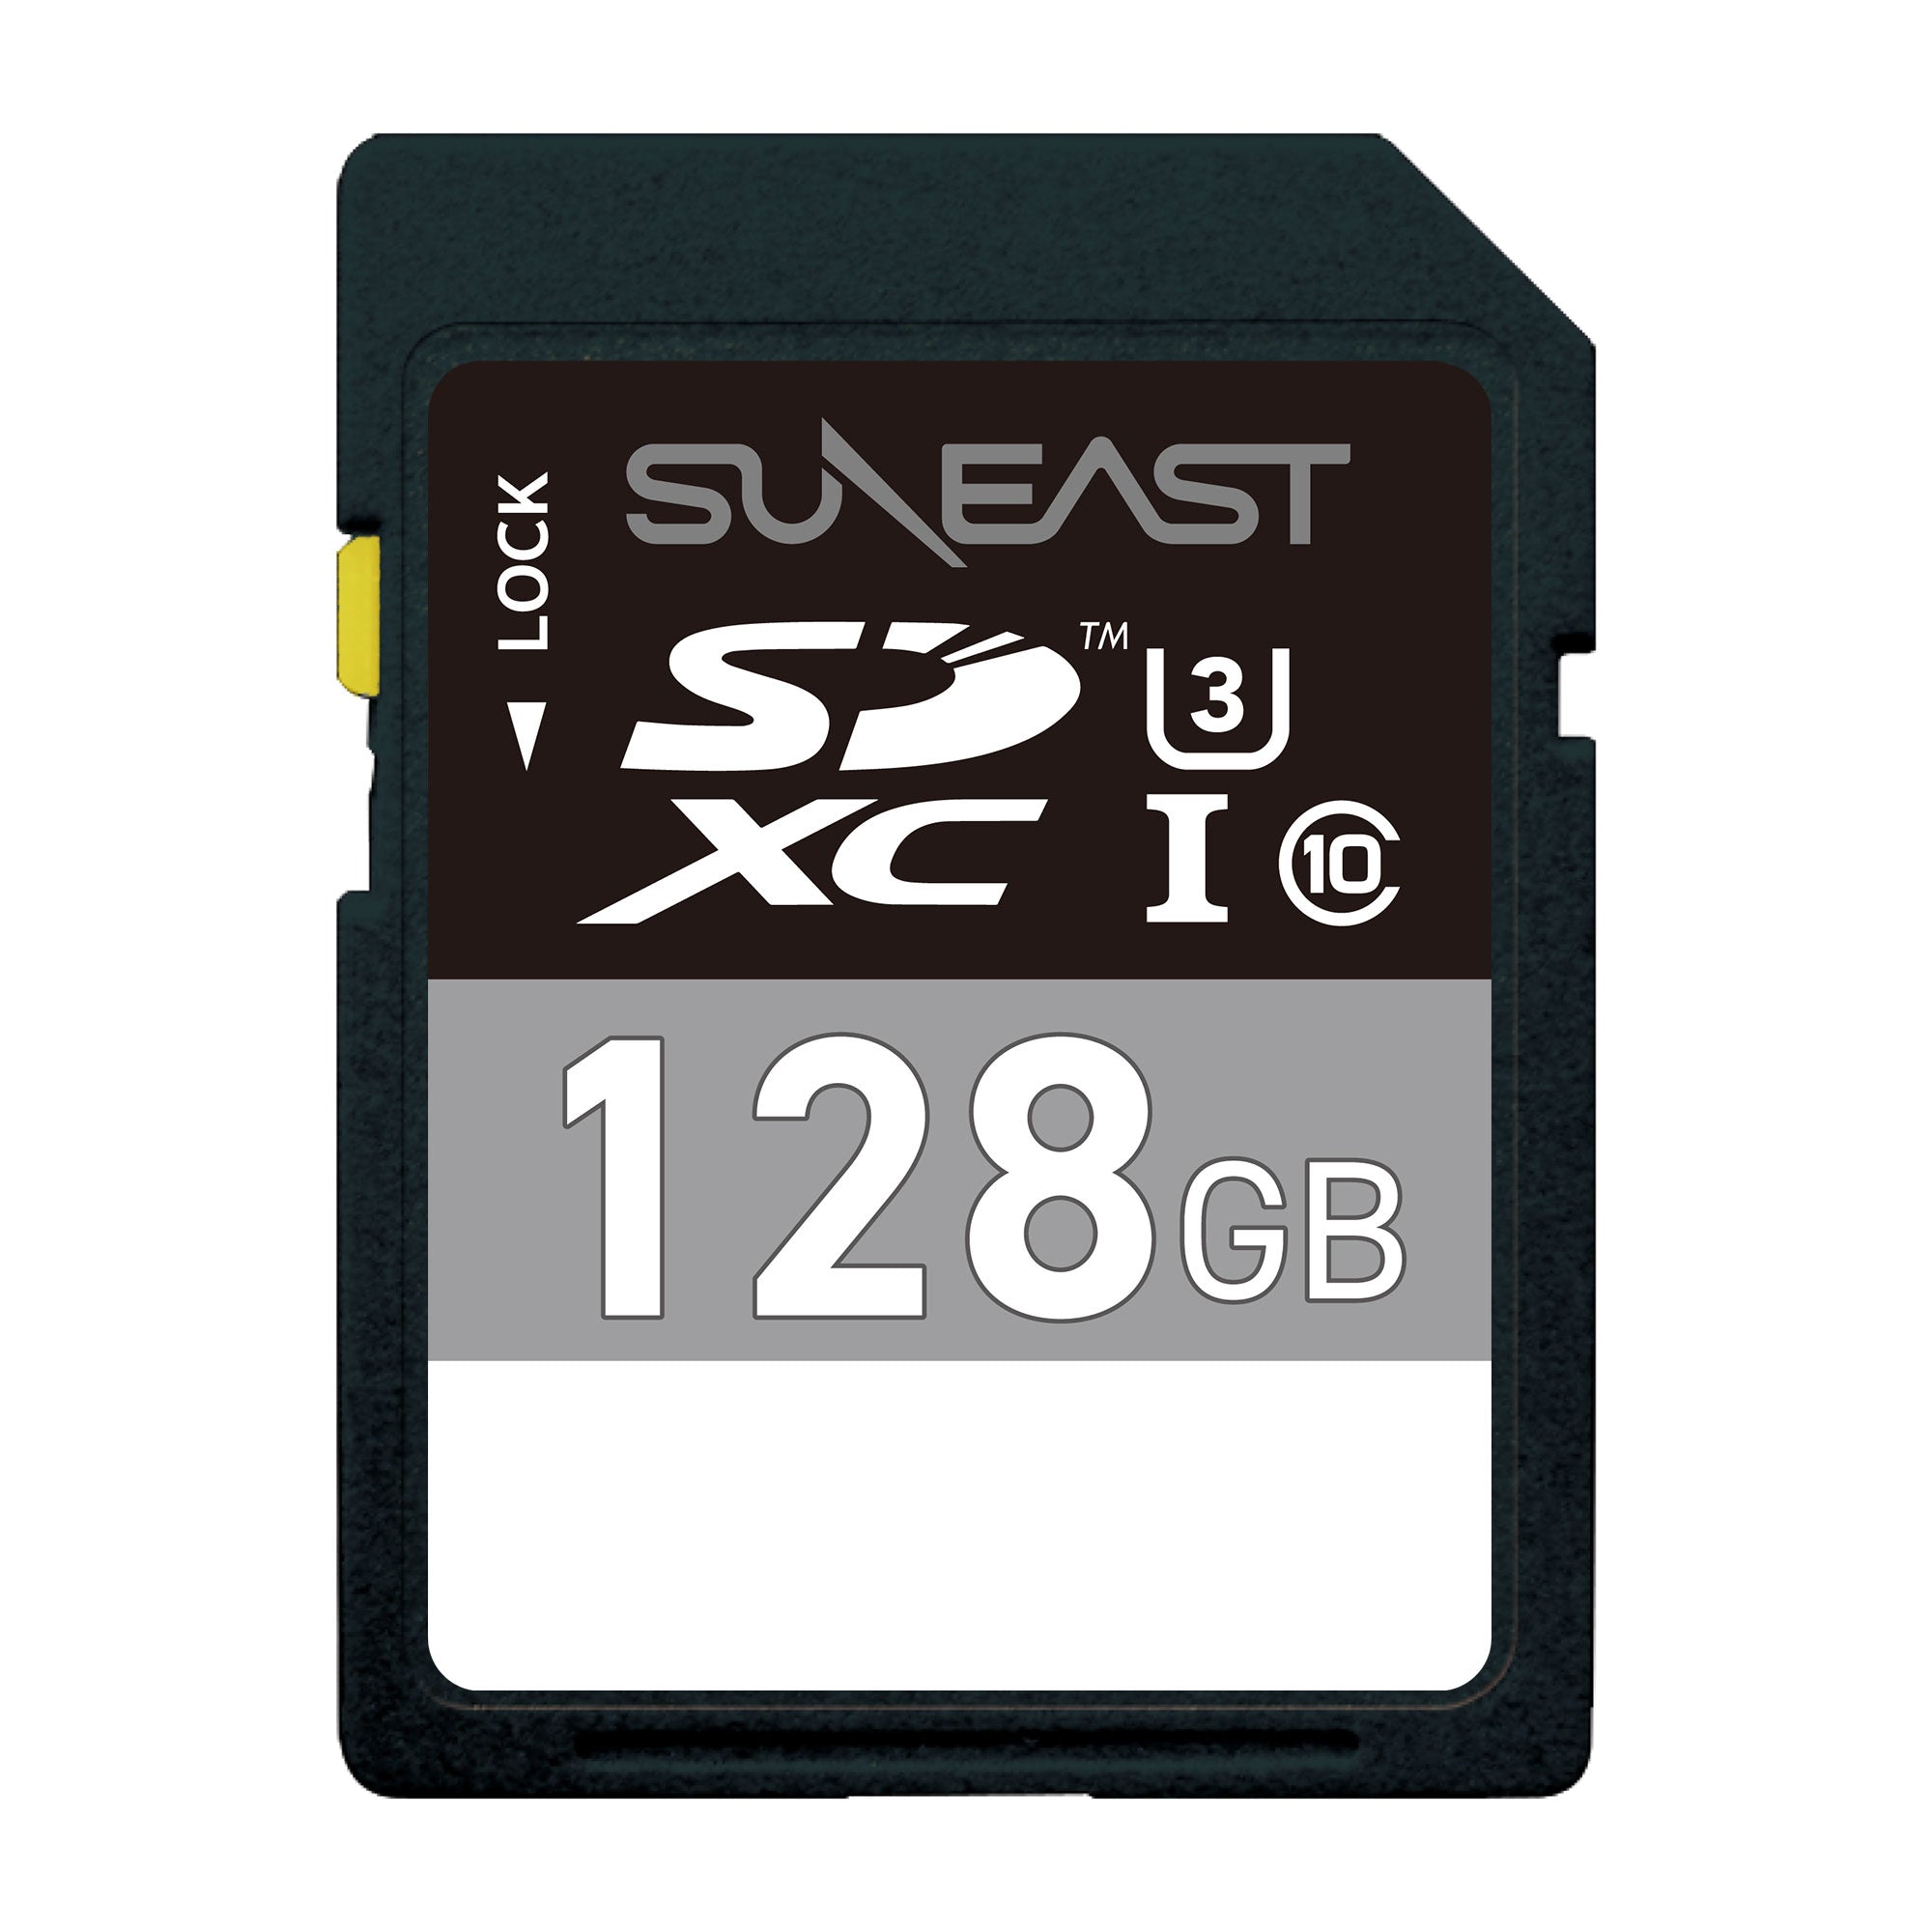 ULTRA PRO SDXC UHS-I Card 128GB - SUNEAST online store